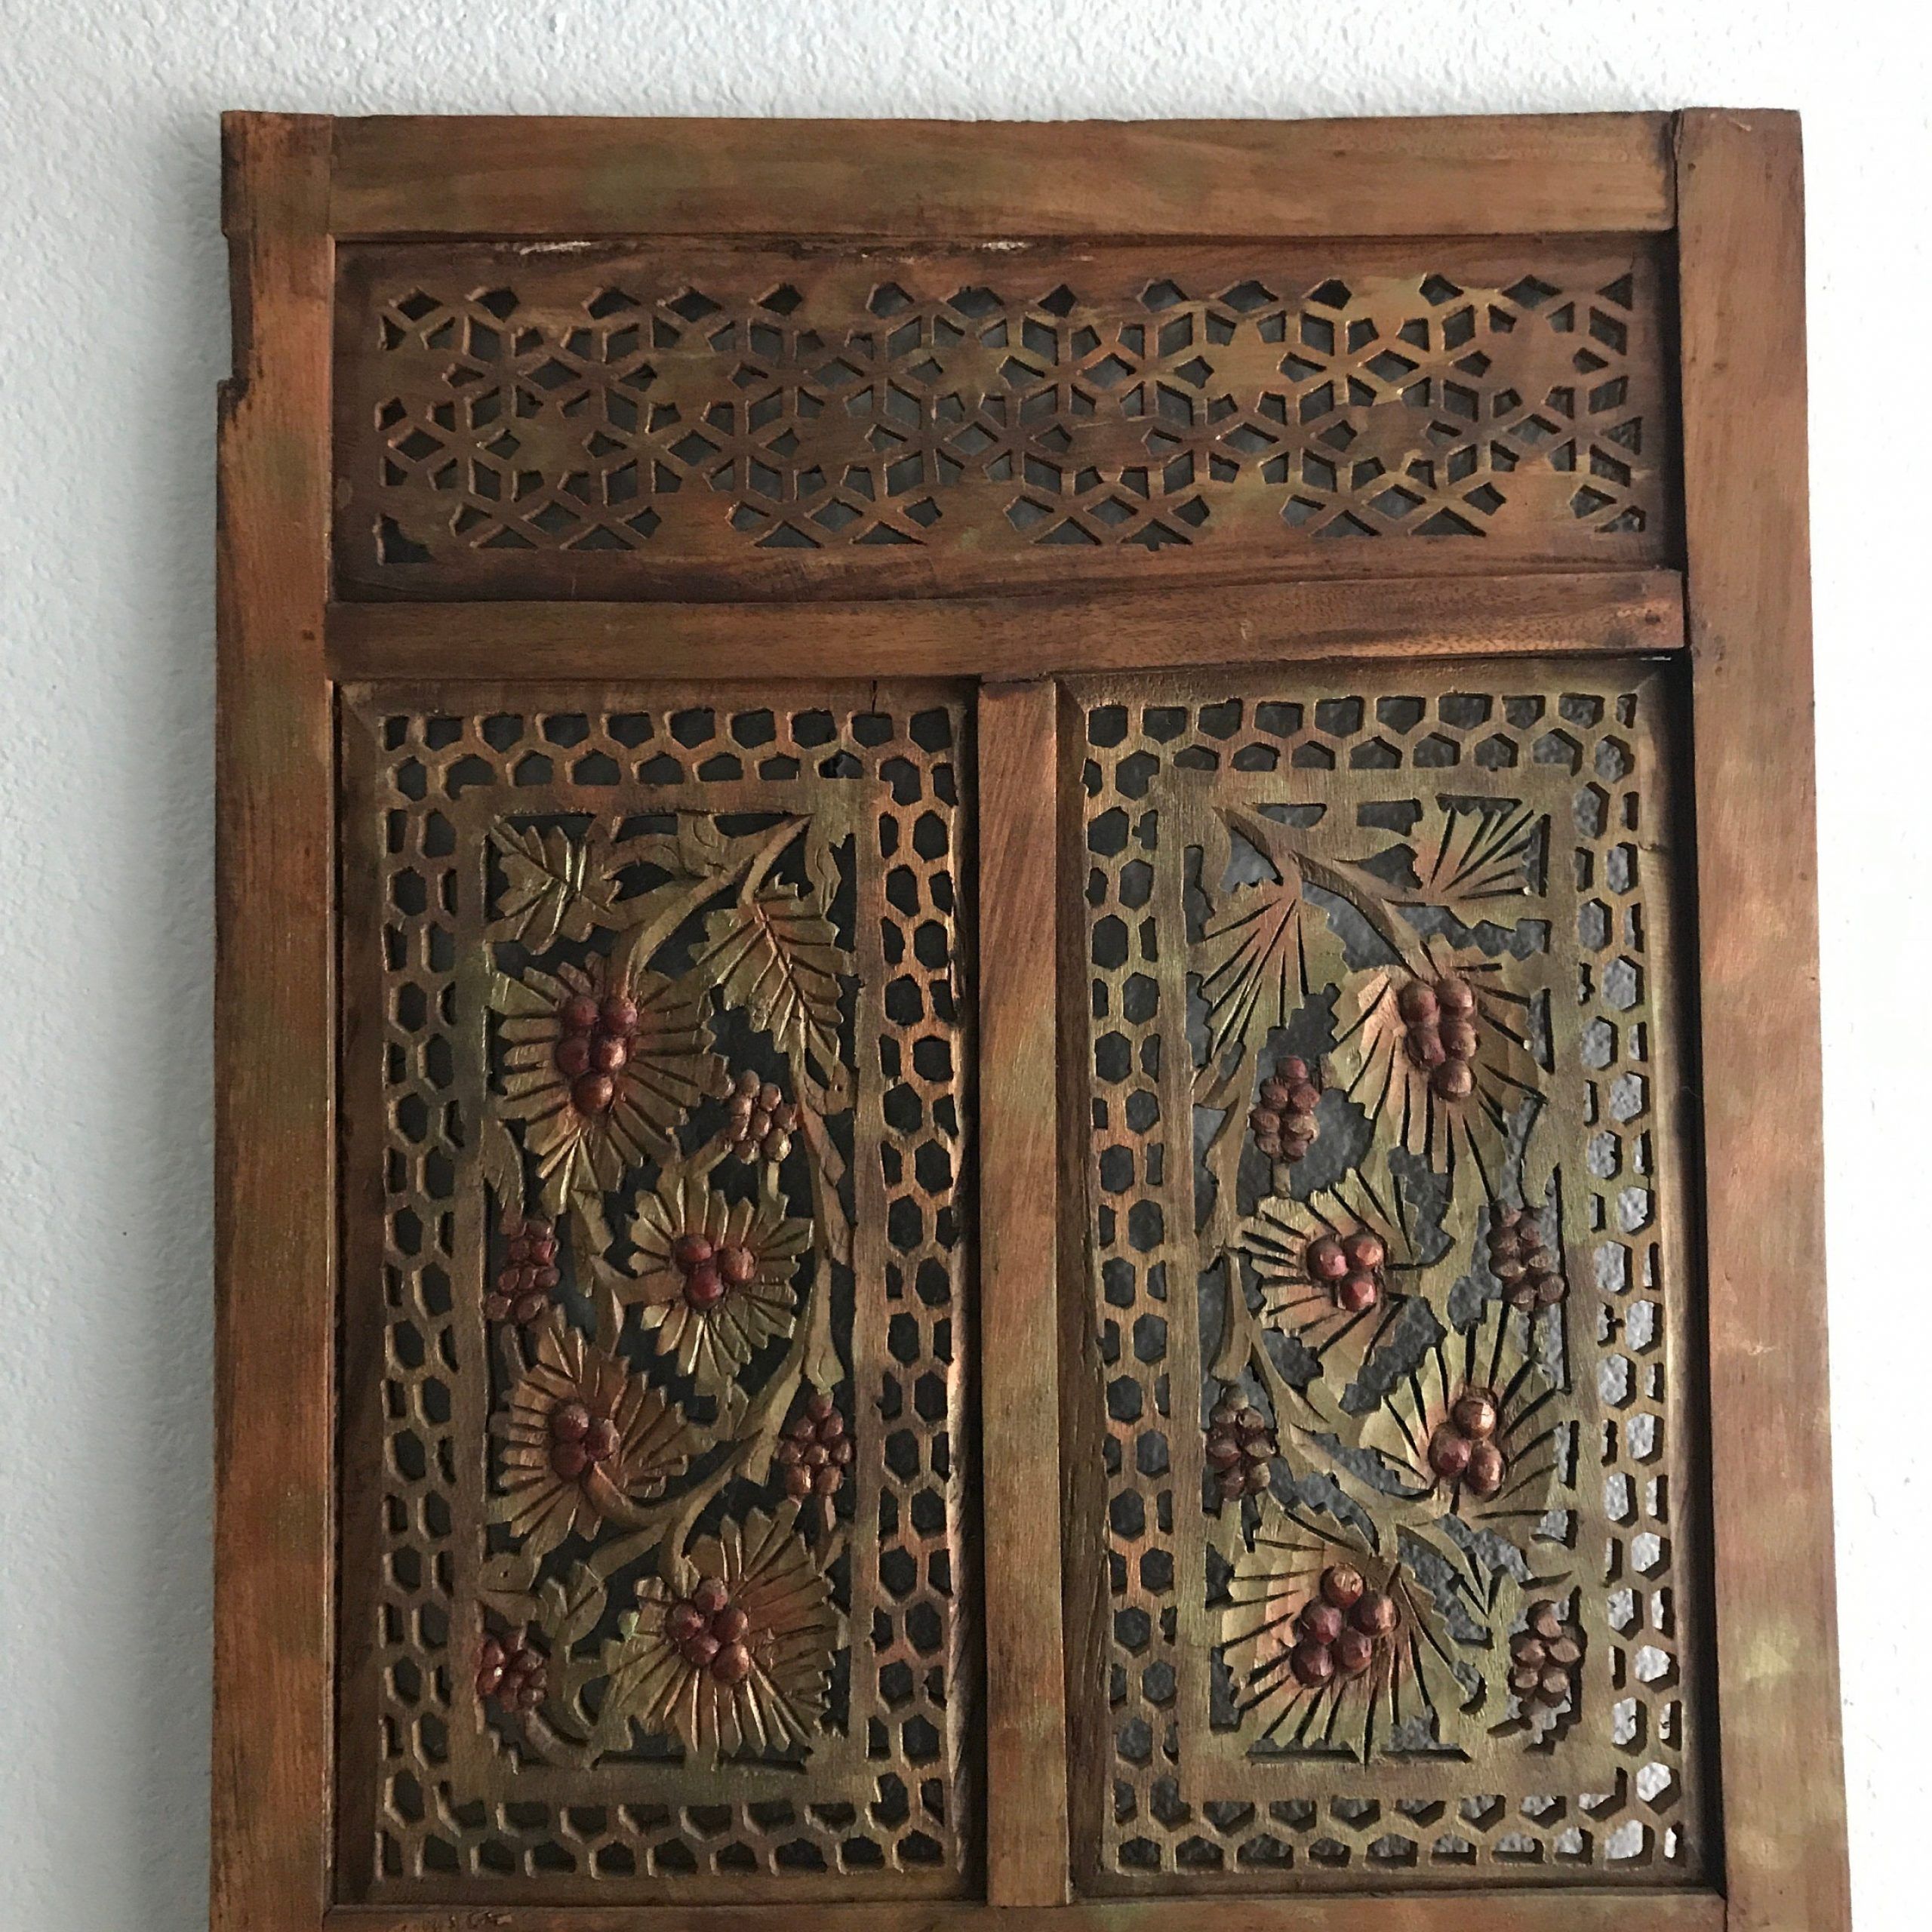 Large Ornate Bohemian Carved Wooden Wall Art Panel / India Carved Wood Inside Filigree Screen Wall Art (View 1 of 15)